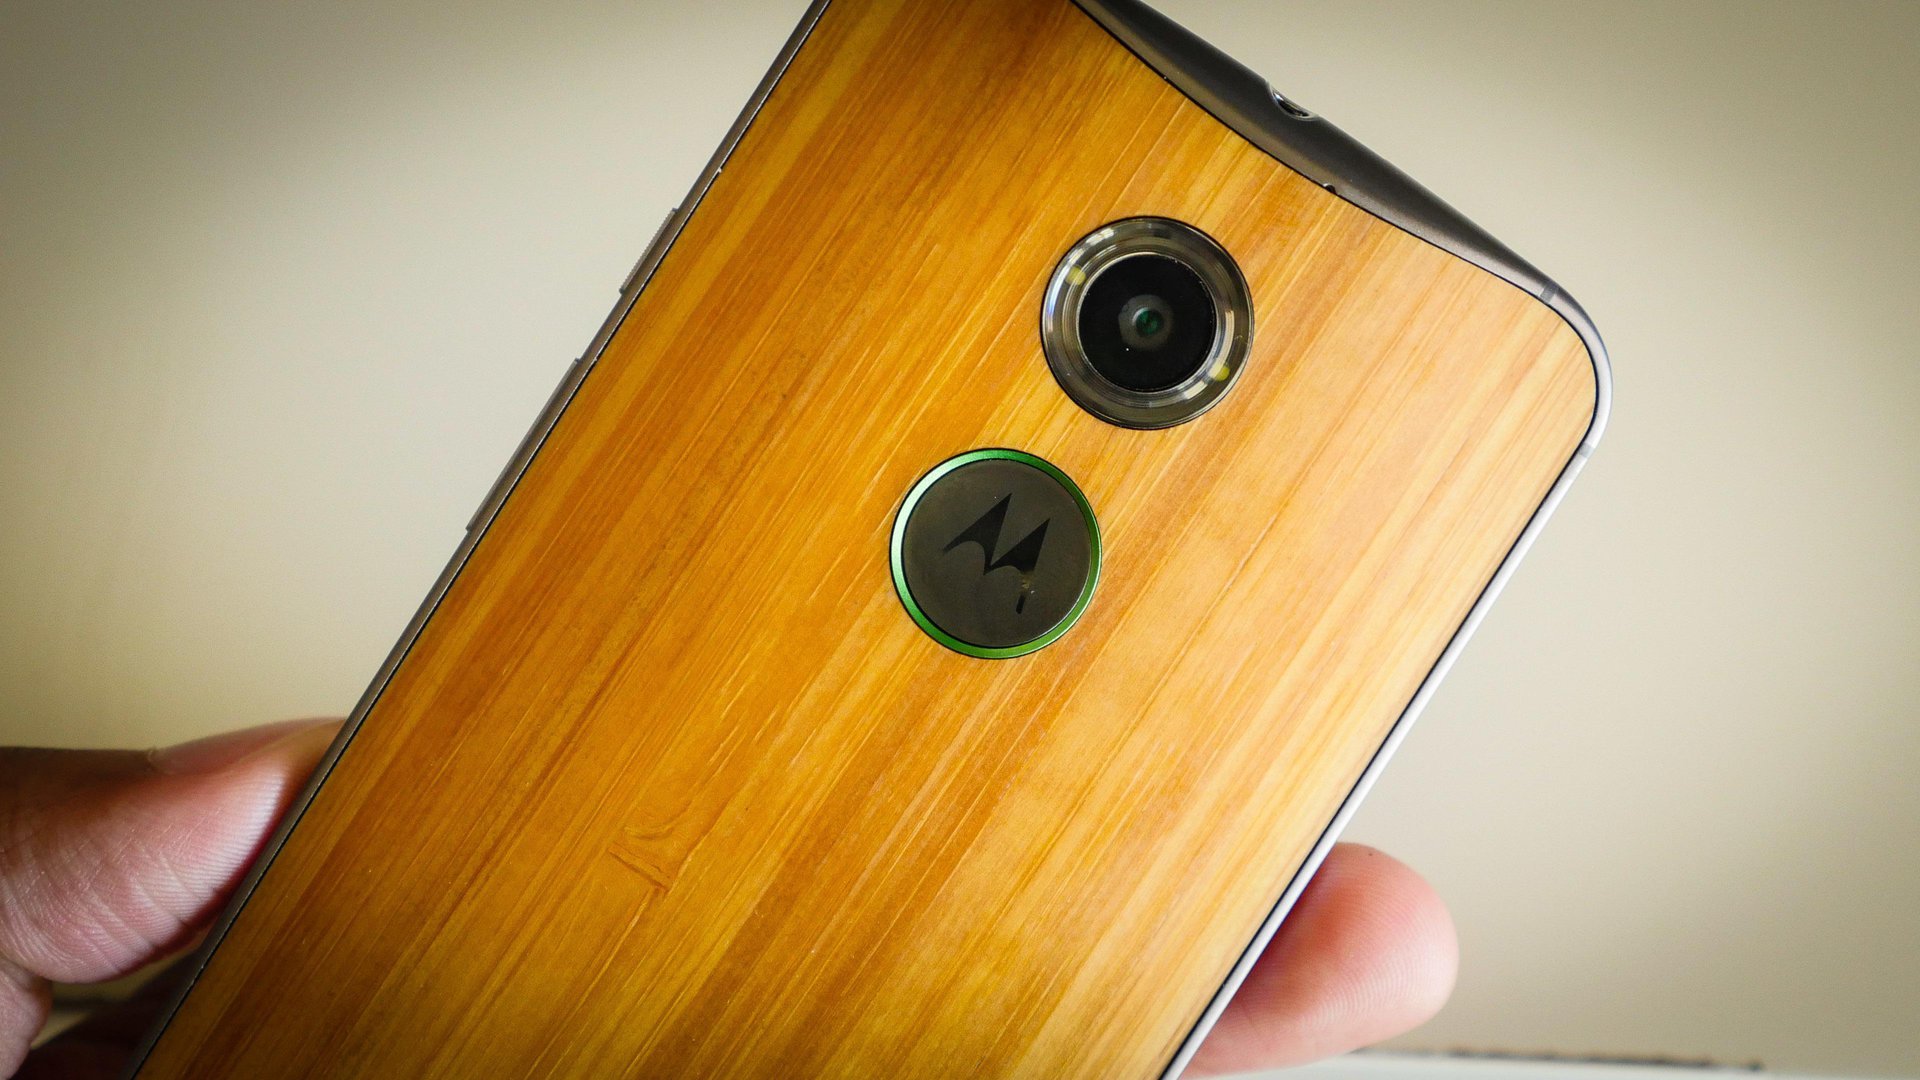 moto x 2014 first impressions (8 of 18)